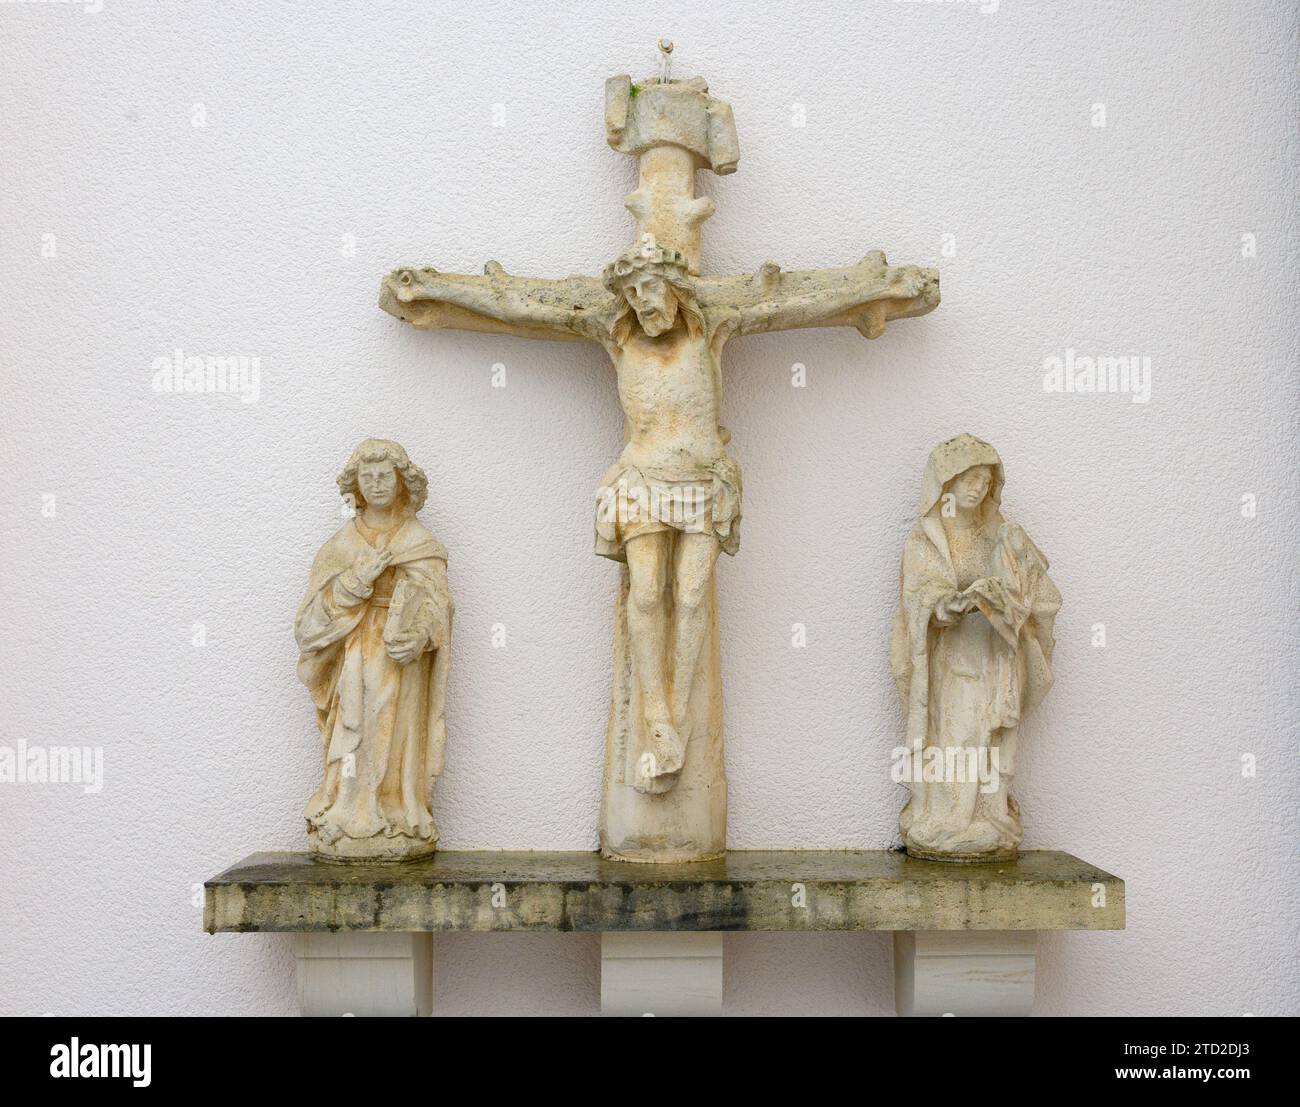 Sculpture of the Crucifixion. Église Saint-Laurent (St Lawrence's Church), Strassen, Luxembourg. Stock Photo